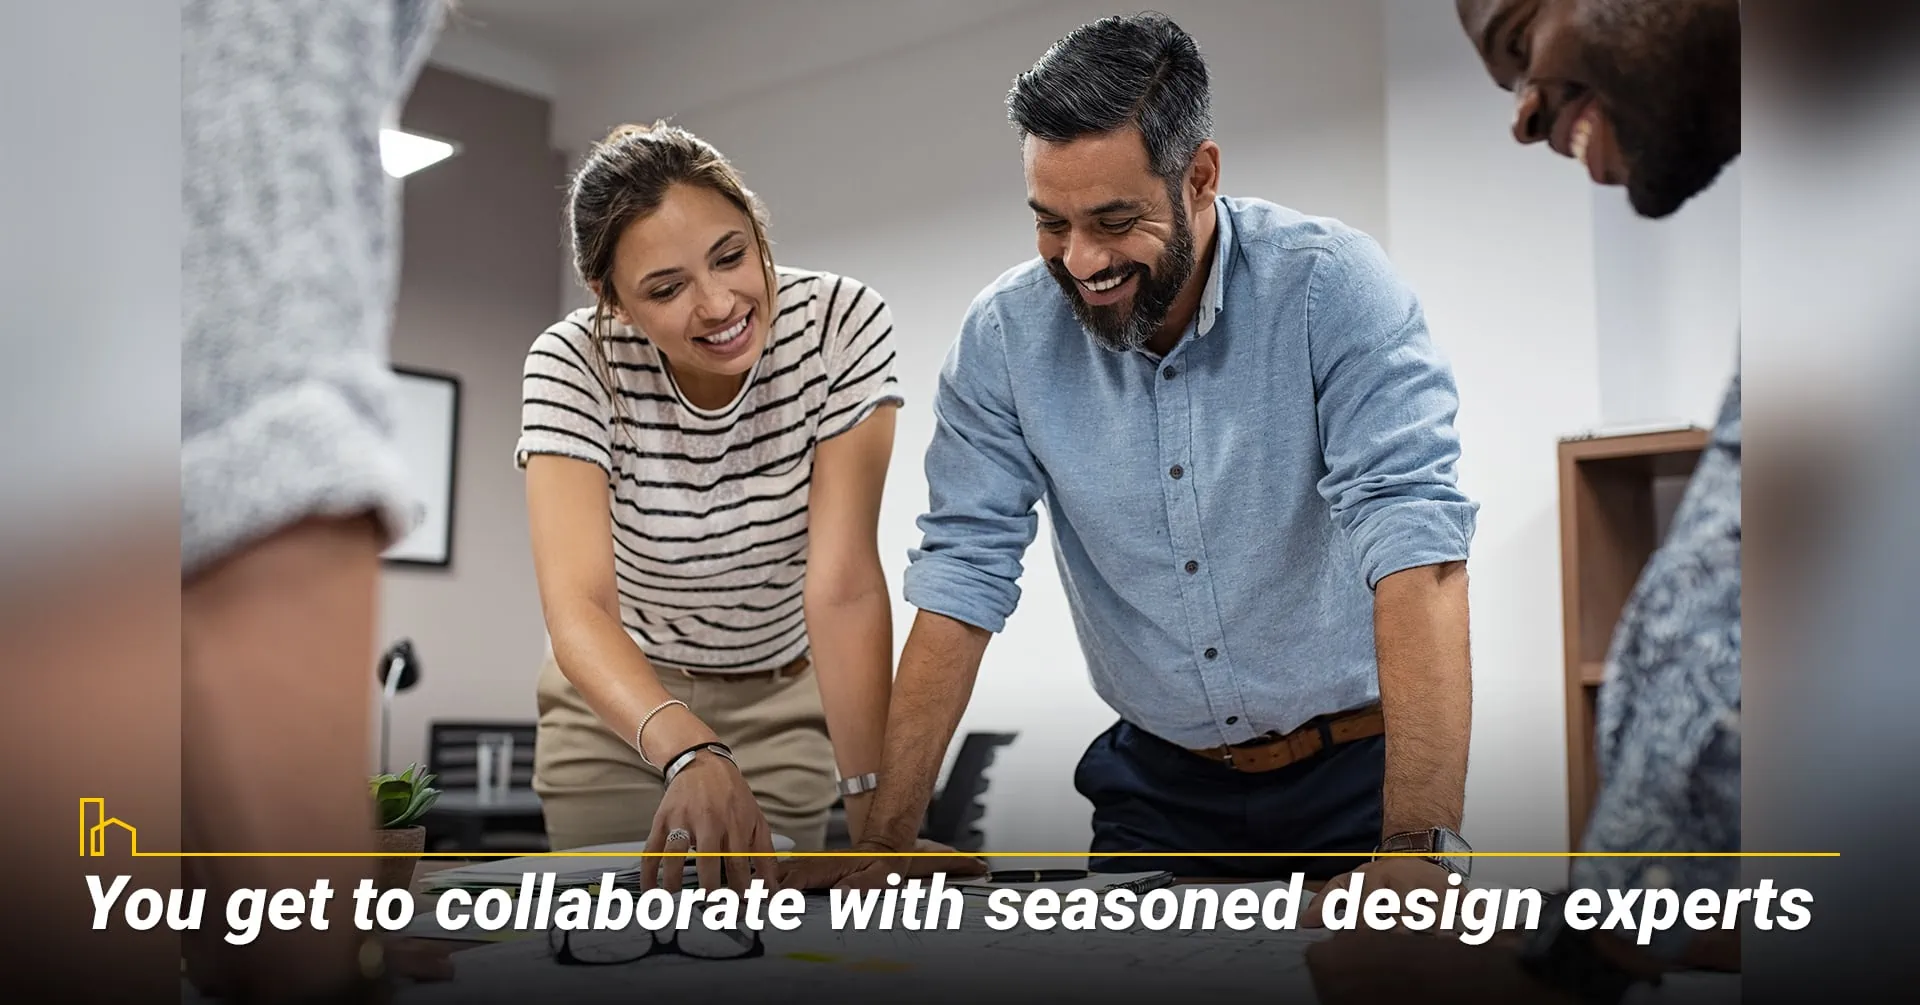 You get to collaborate with seasoned design experts.